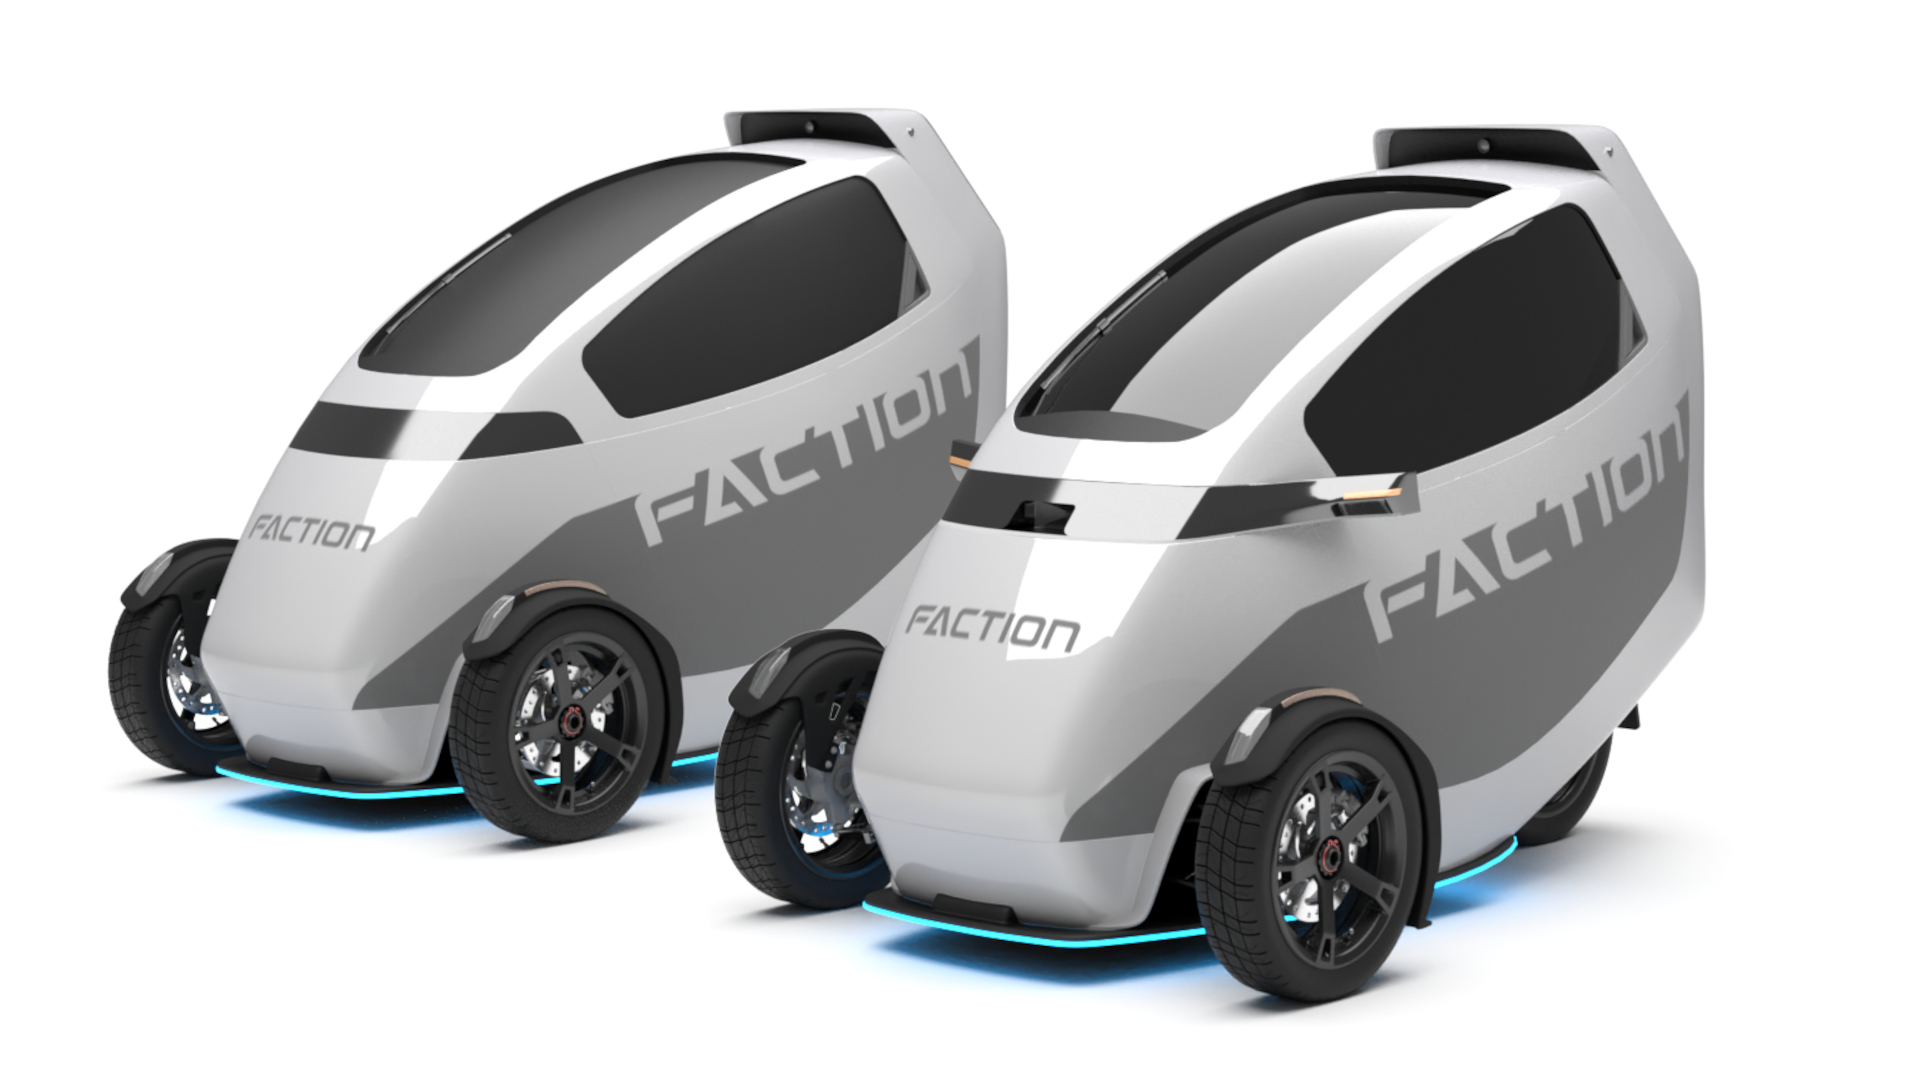 Urban logistics and transportation company Faction and its driverless electric vehicles get a boost